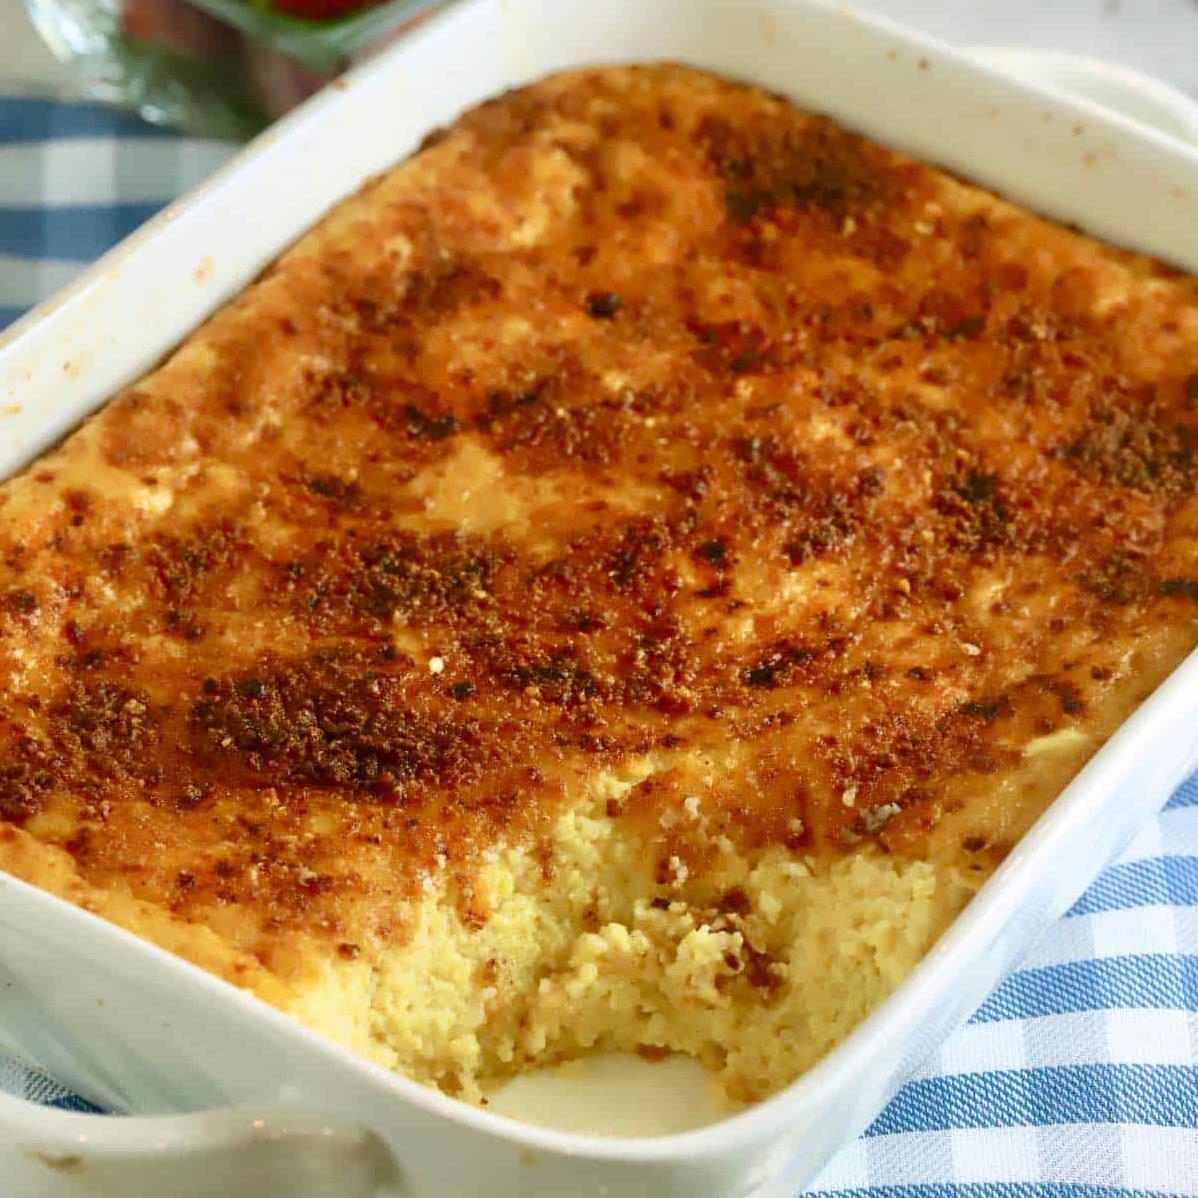  A warm and comforting casserole that's perfect for any occasion.